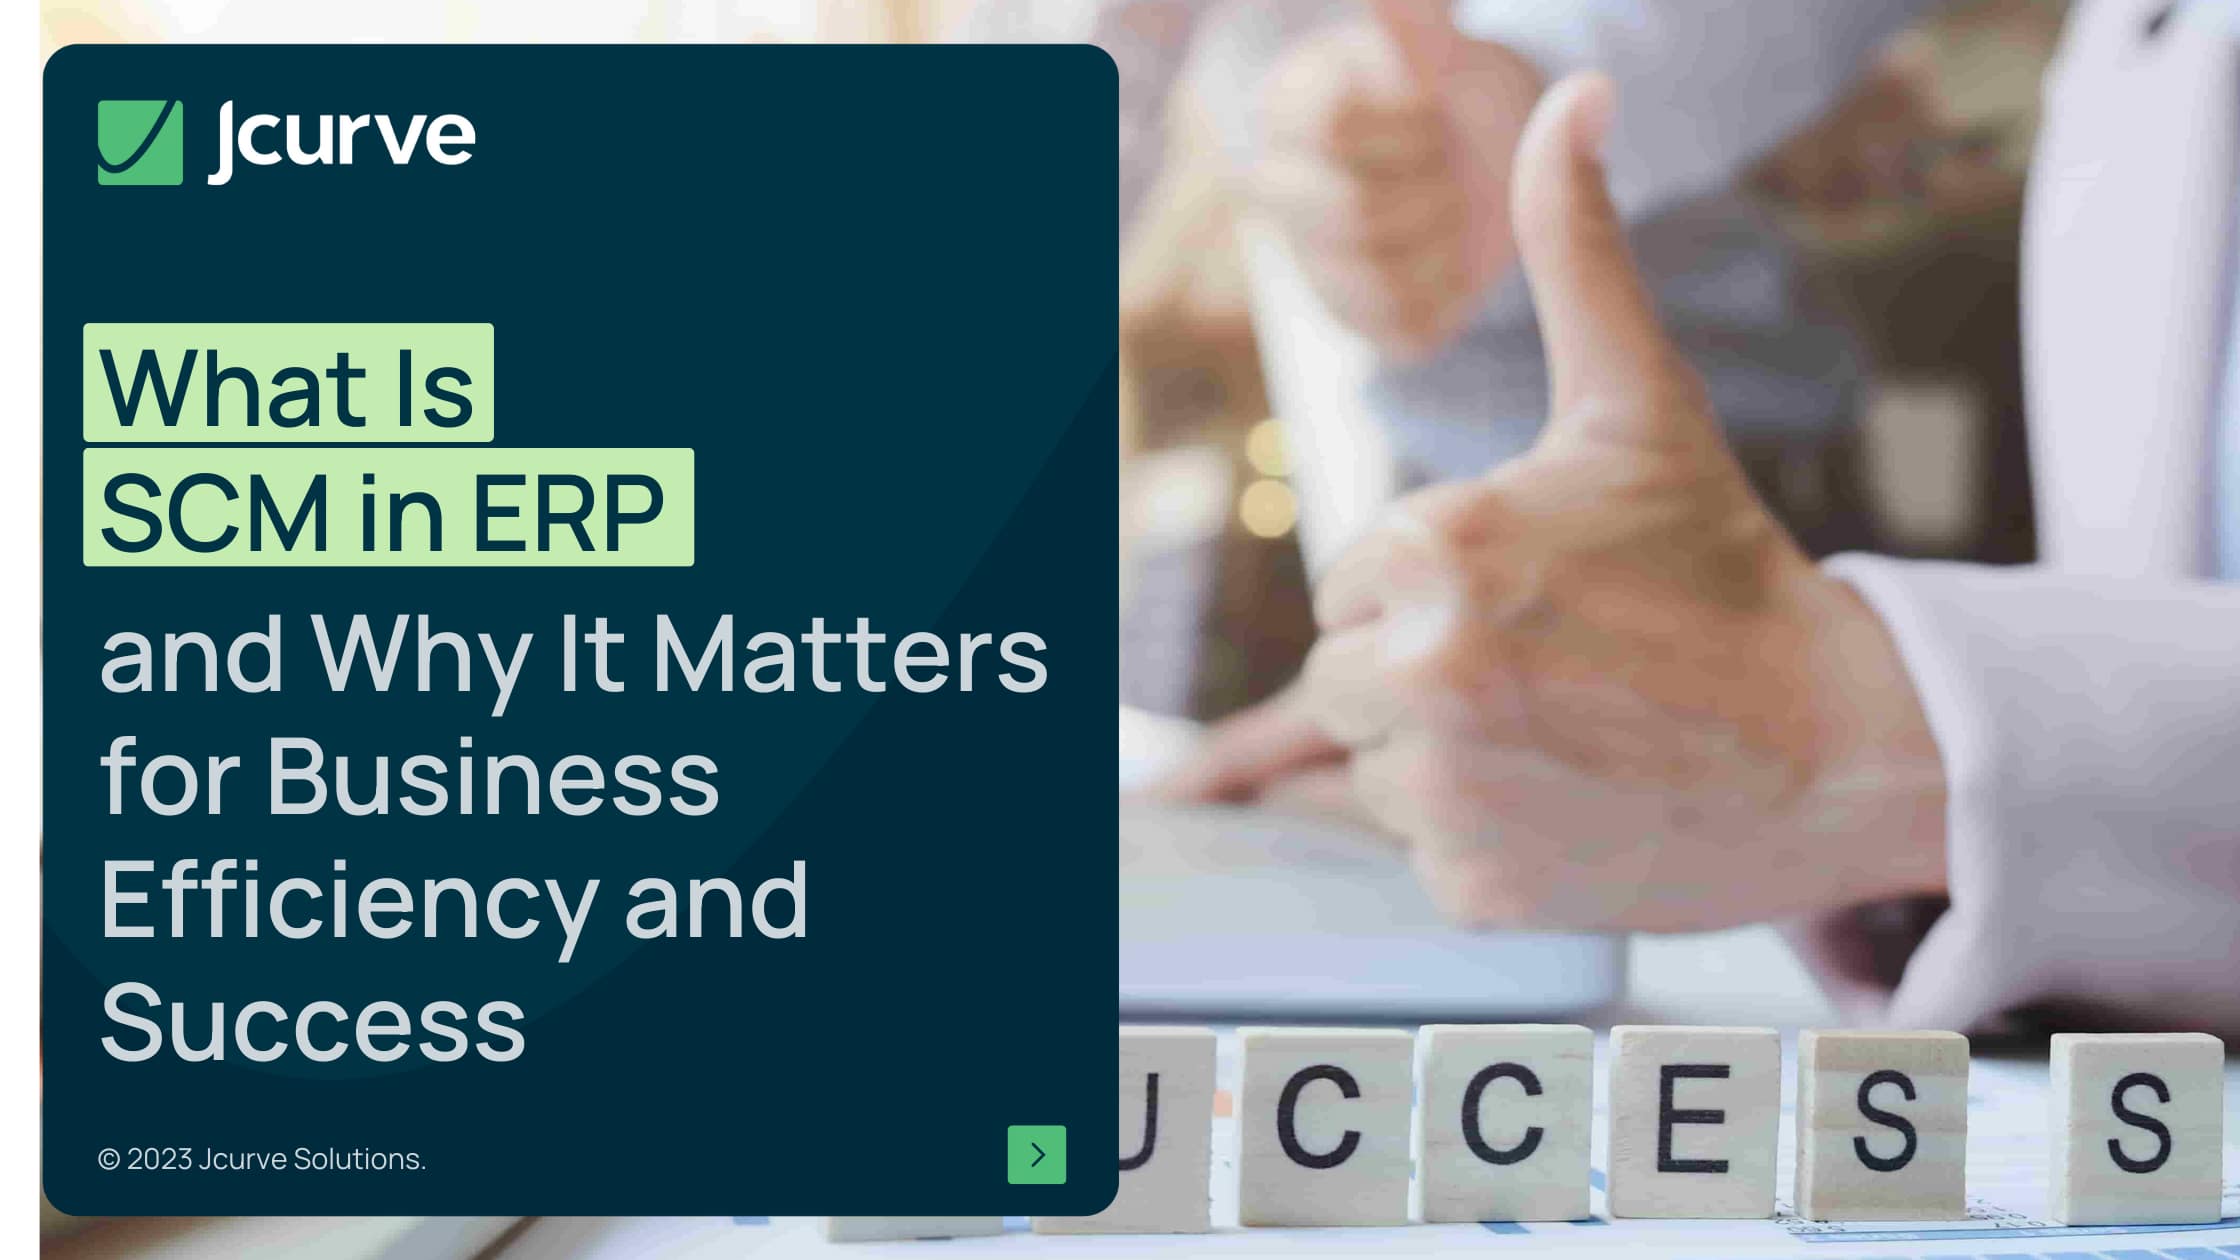 What Is SCM in ERP and Why It Matters for Business Efficiency and Success